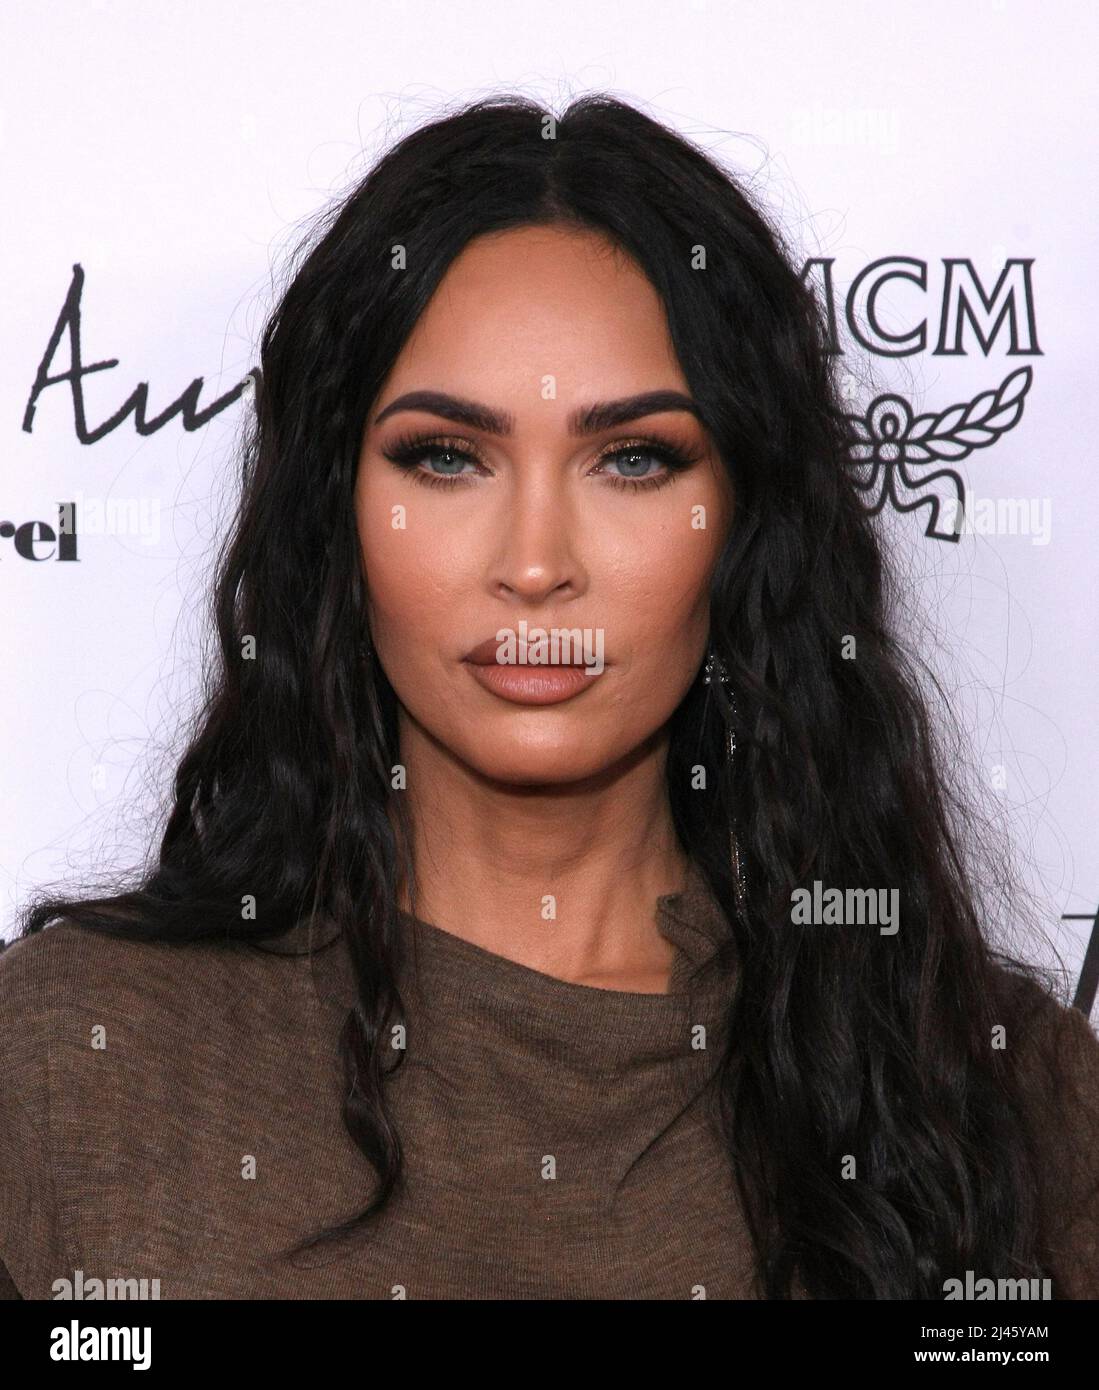 Megan Fox attends The Daily Front Row's 6th Annual Fashion Los Angeles Awards at Beverly Wilshire, A Four Seasons Hotel on April 10, 2022 in Beverly Hills, California. Photo: CraSH/imageSPACE/MediaPunch Stock Photo